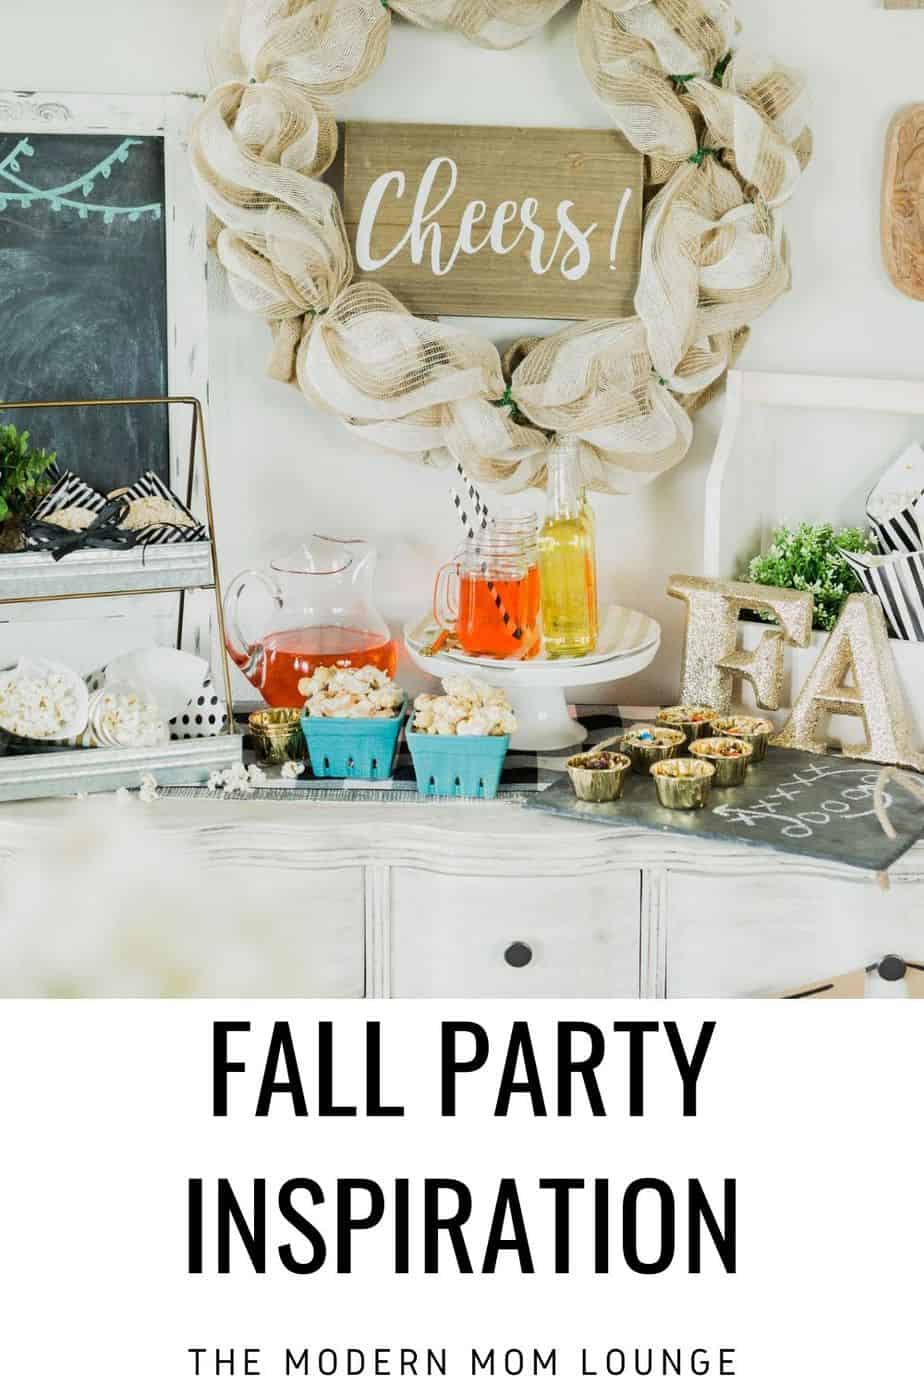 Interview with Debi Lilly: Fall Party Inspiration